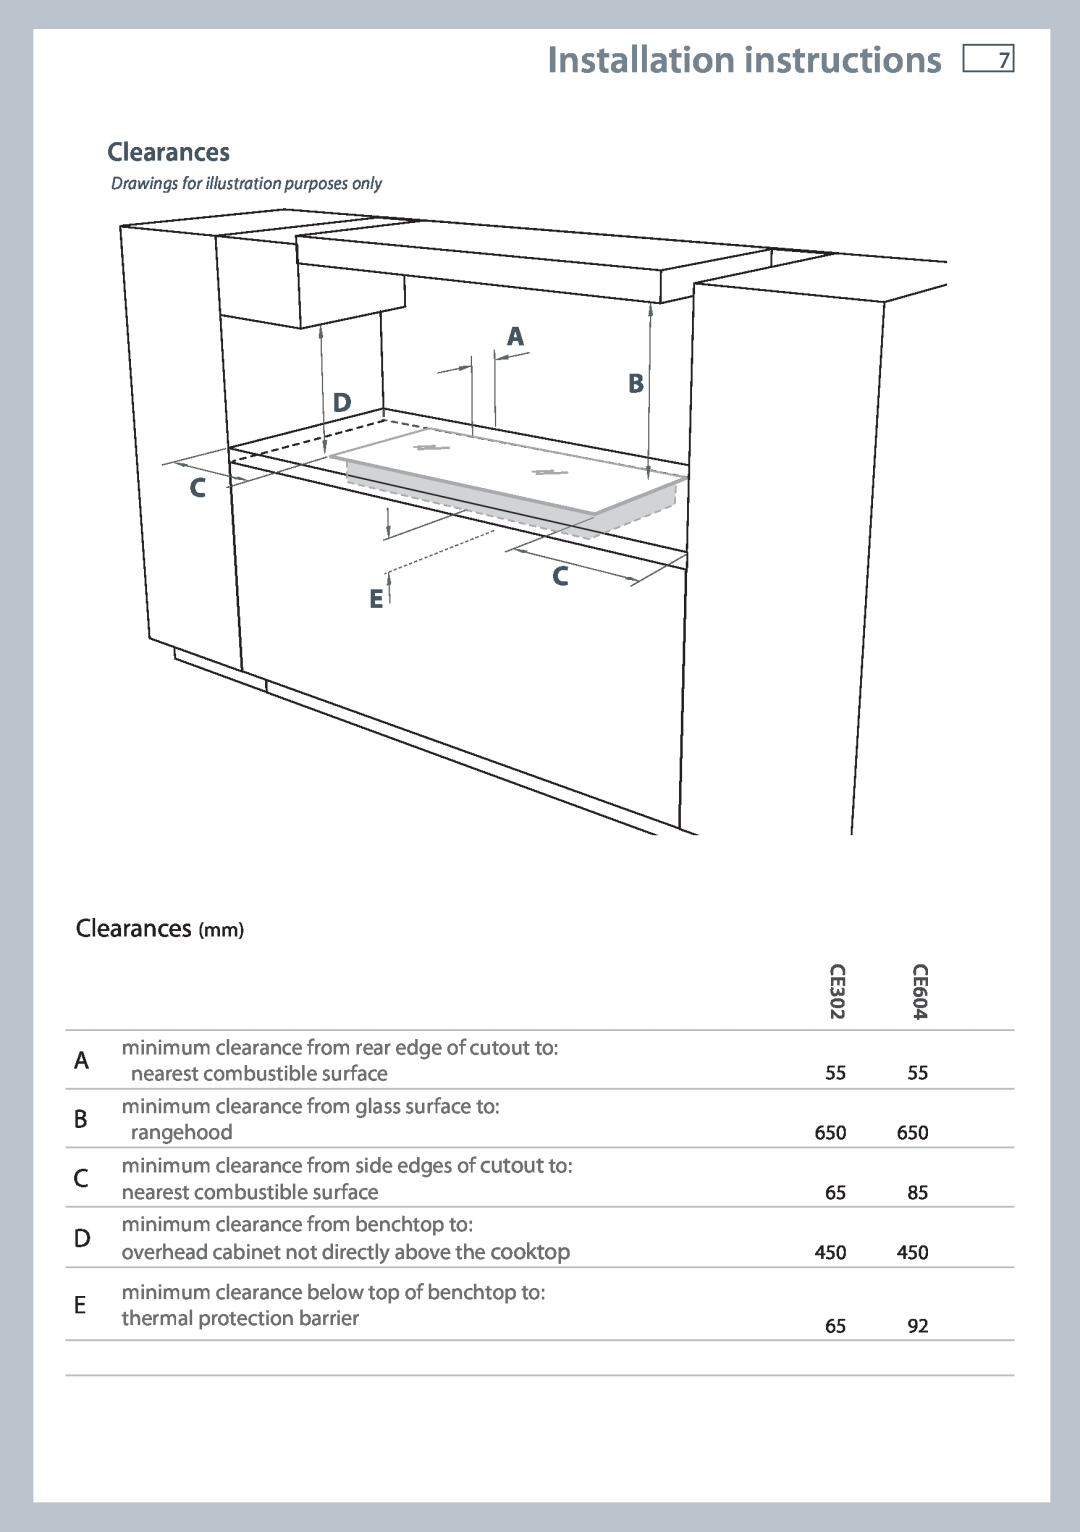 Fisher & Paykel CE604, CE302 installation instructions Clearances mm, Installation instructions 